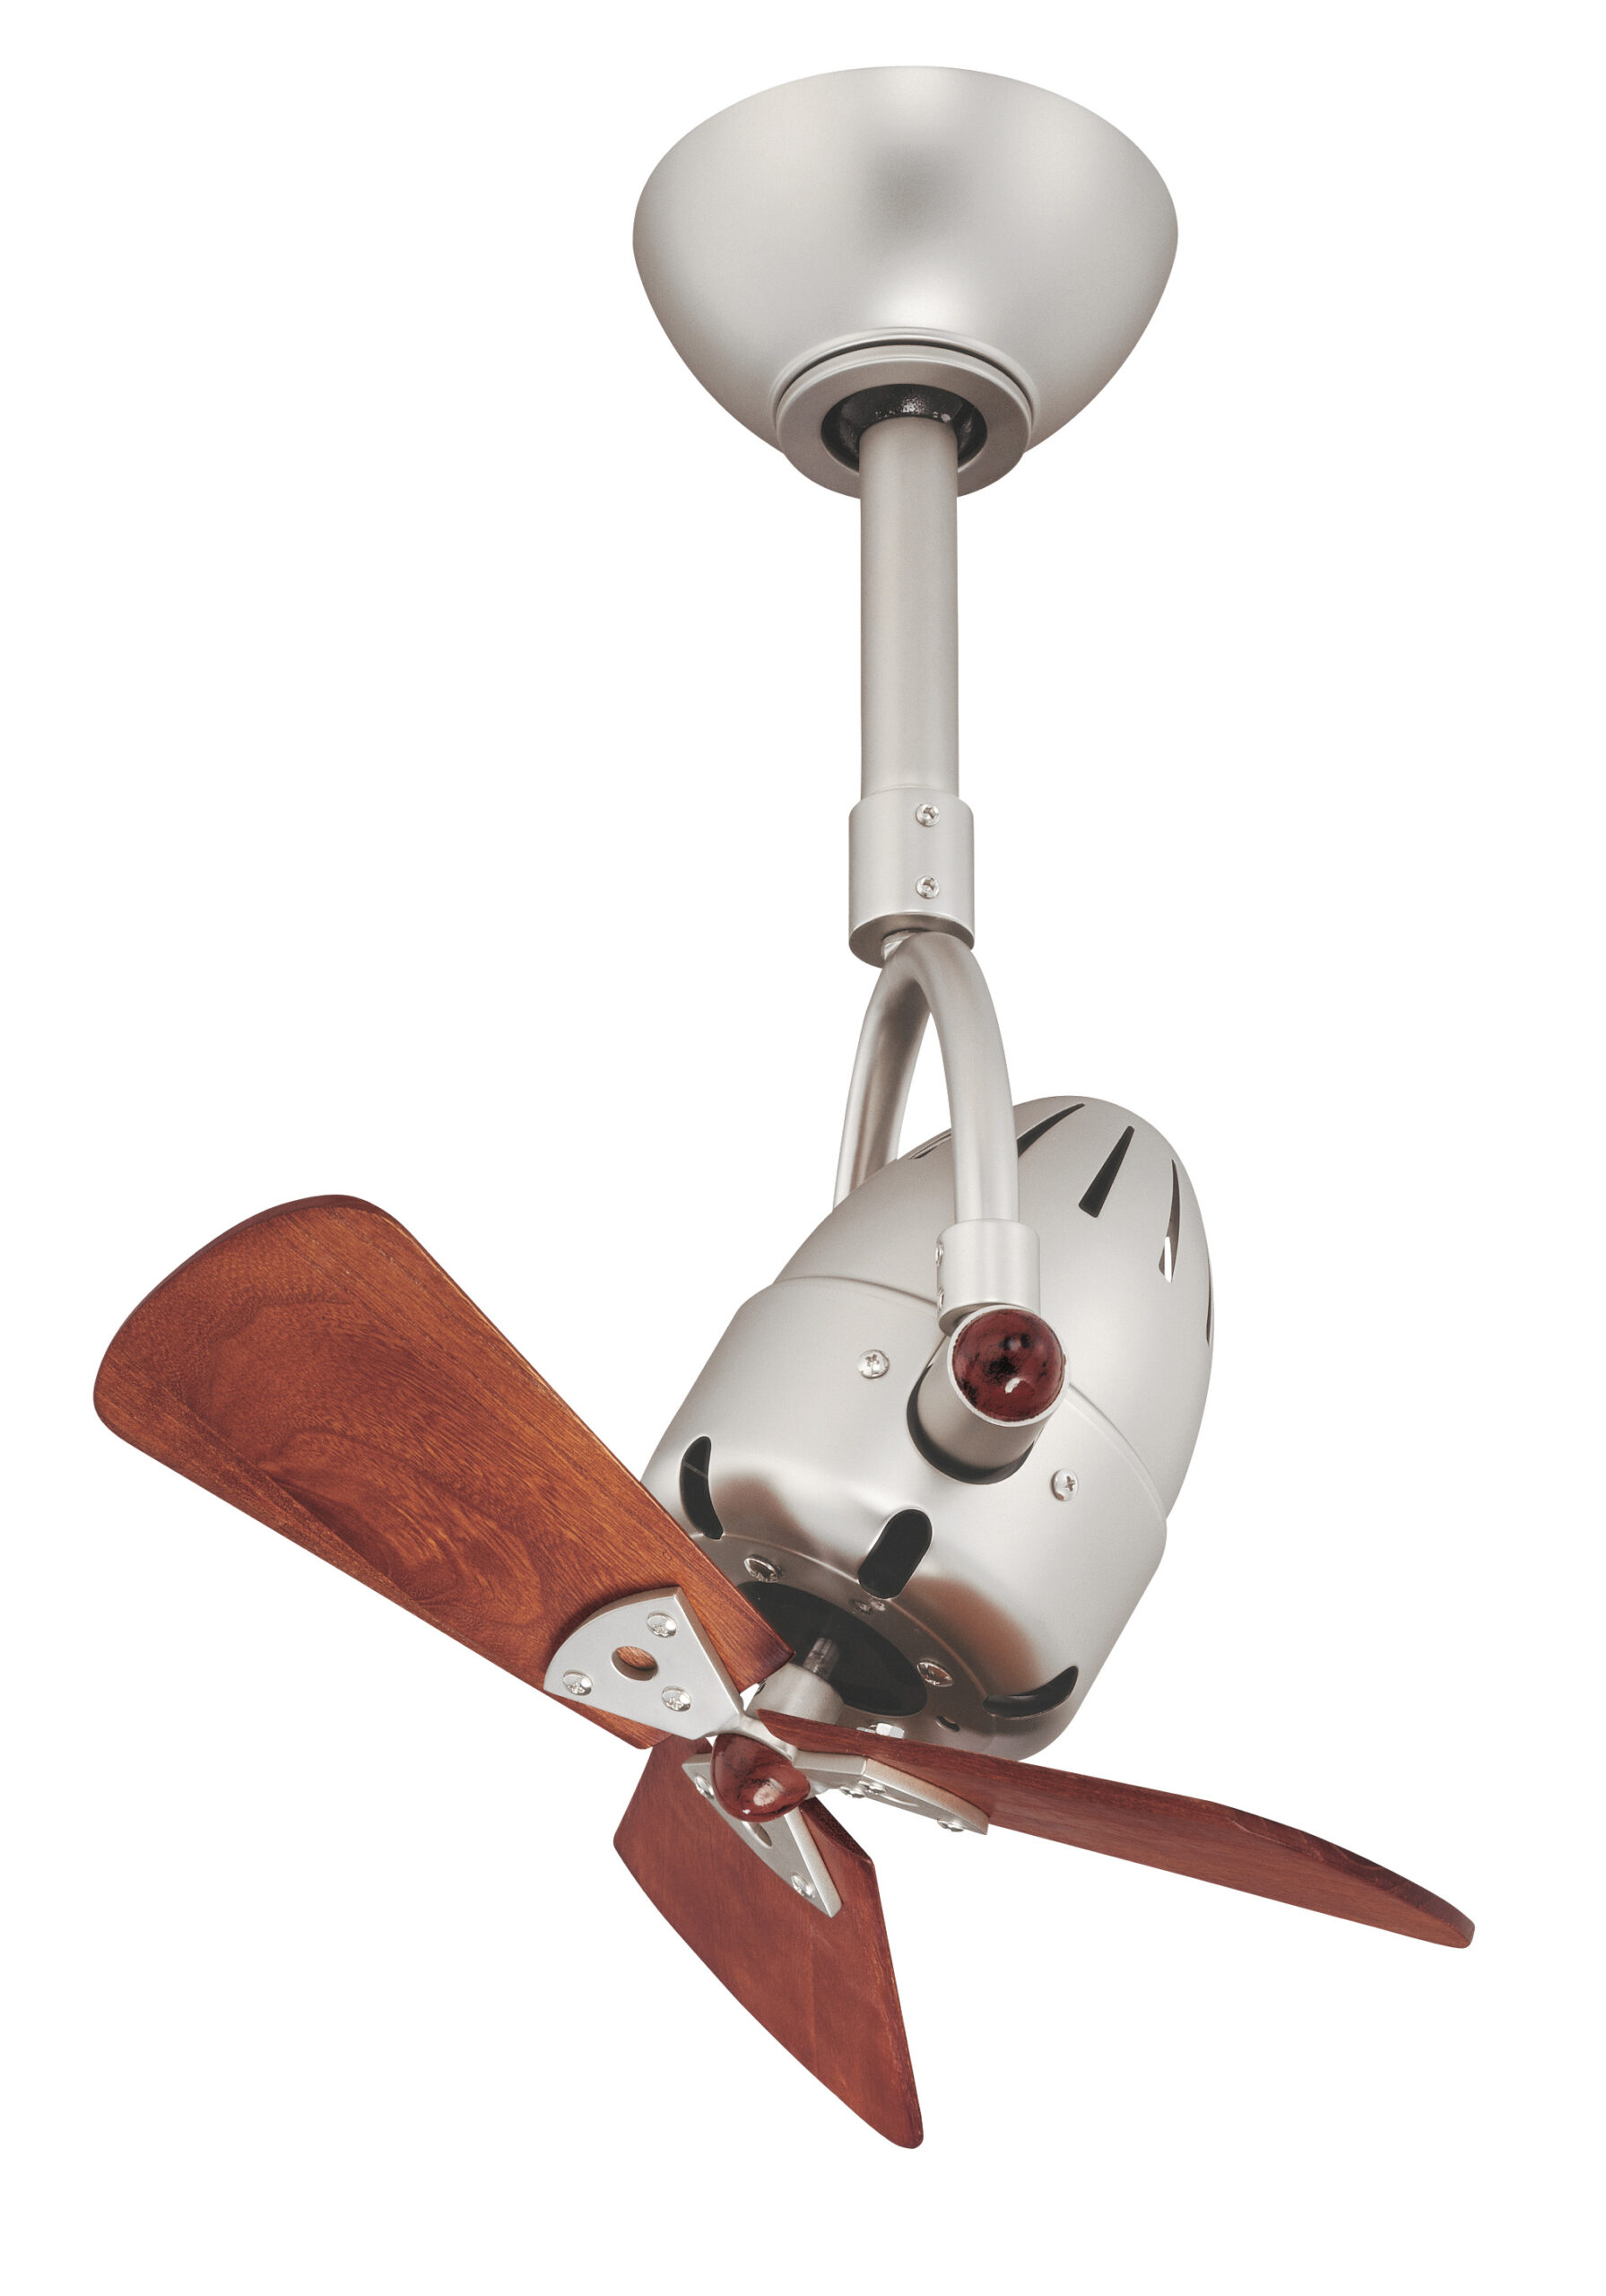 Diane ceiling fan in Brushed Nickel with Mahogany wood blades